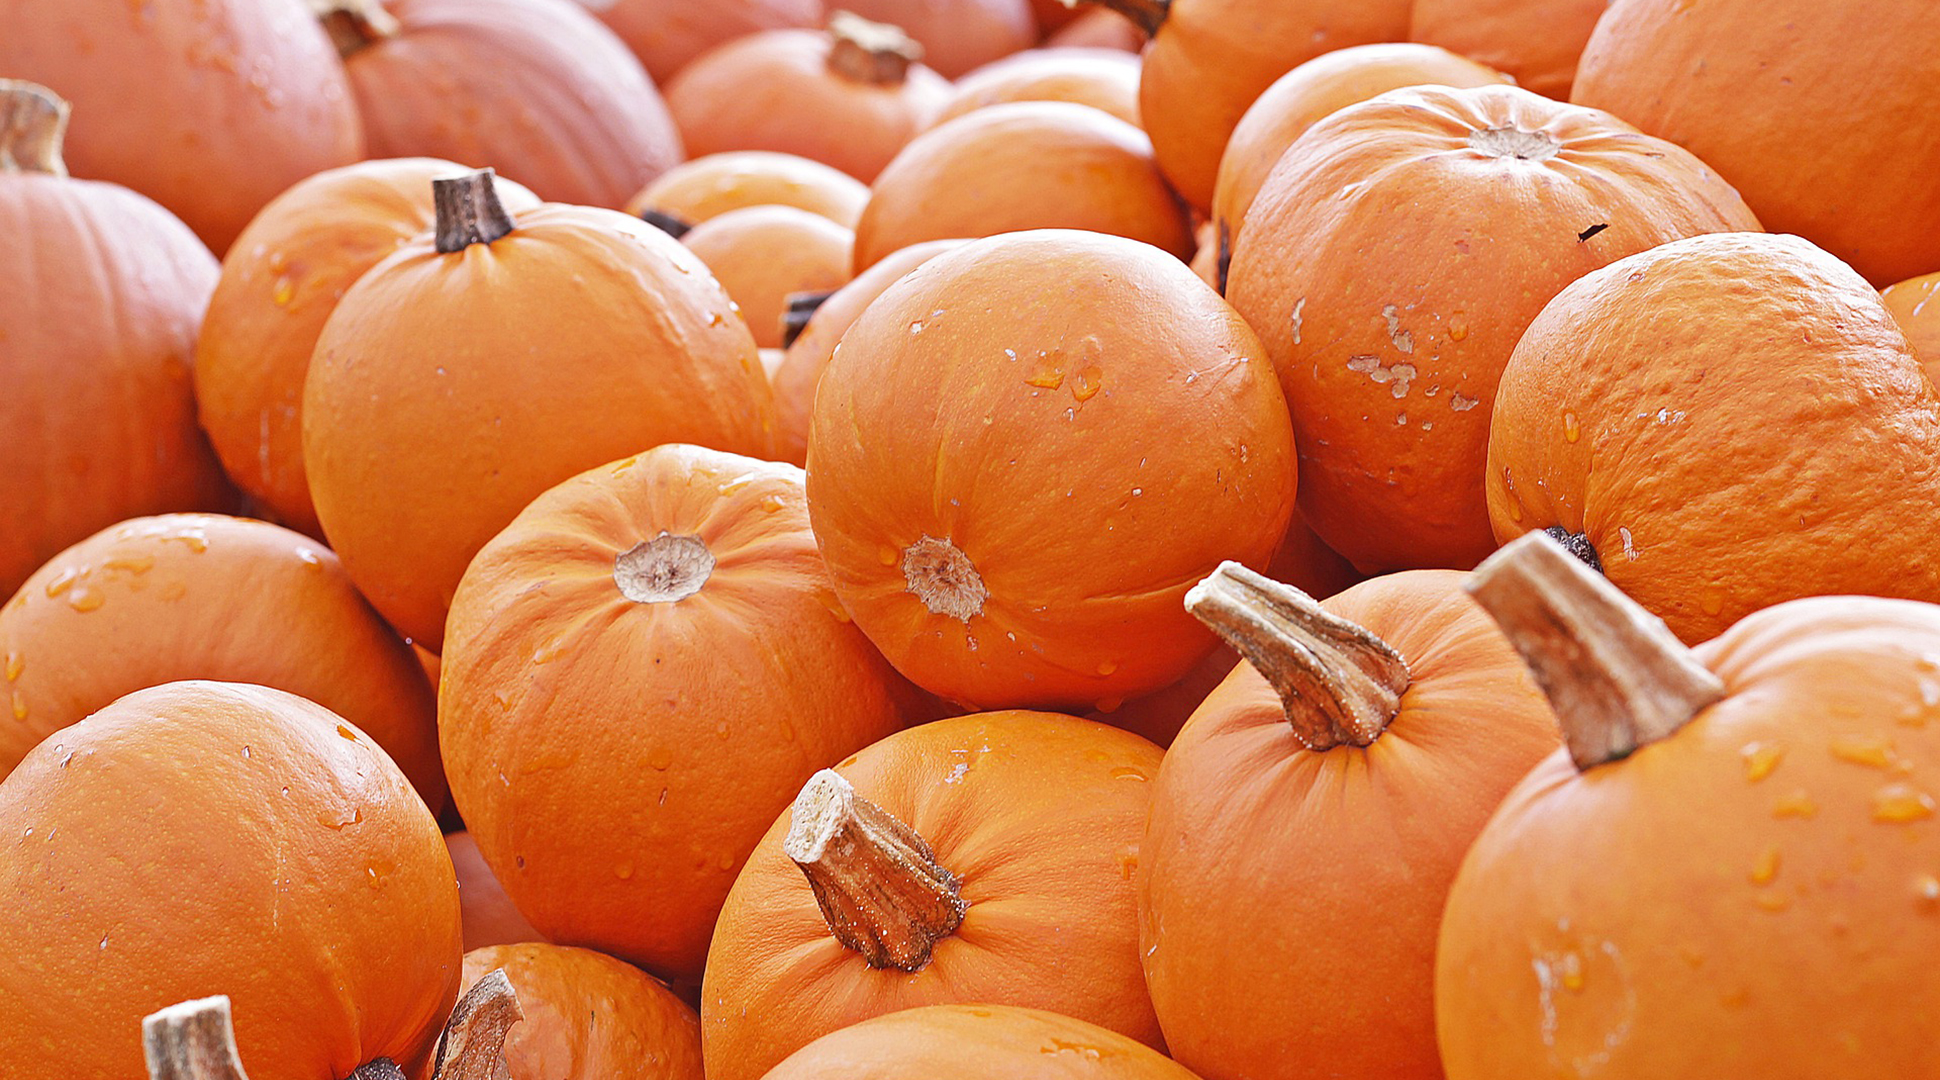 Did you know these pumpkin facts?